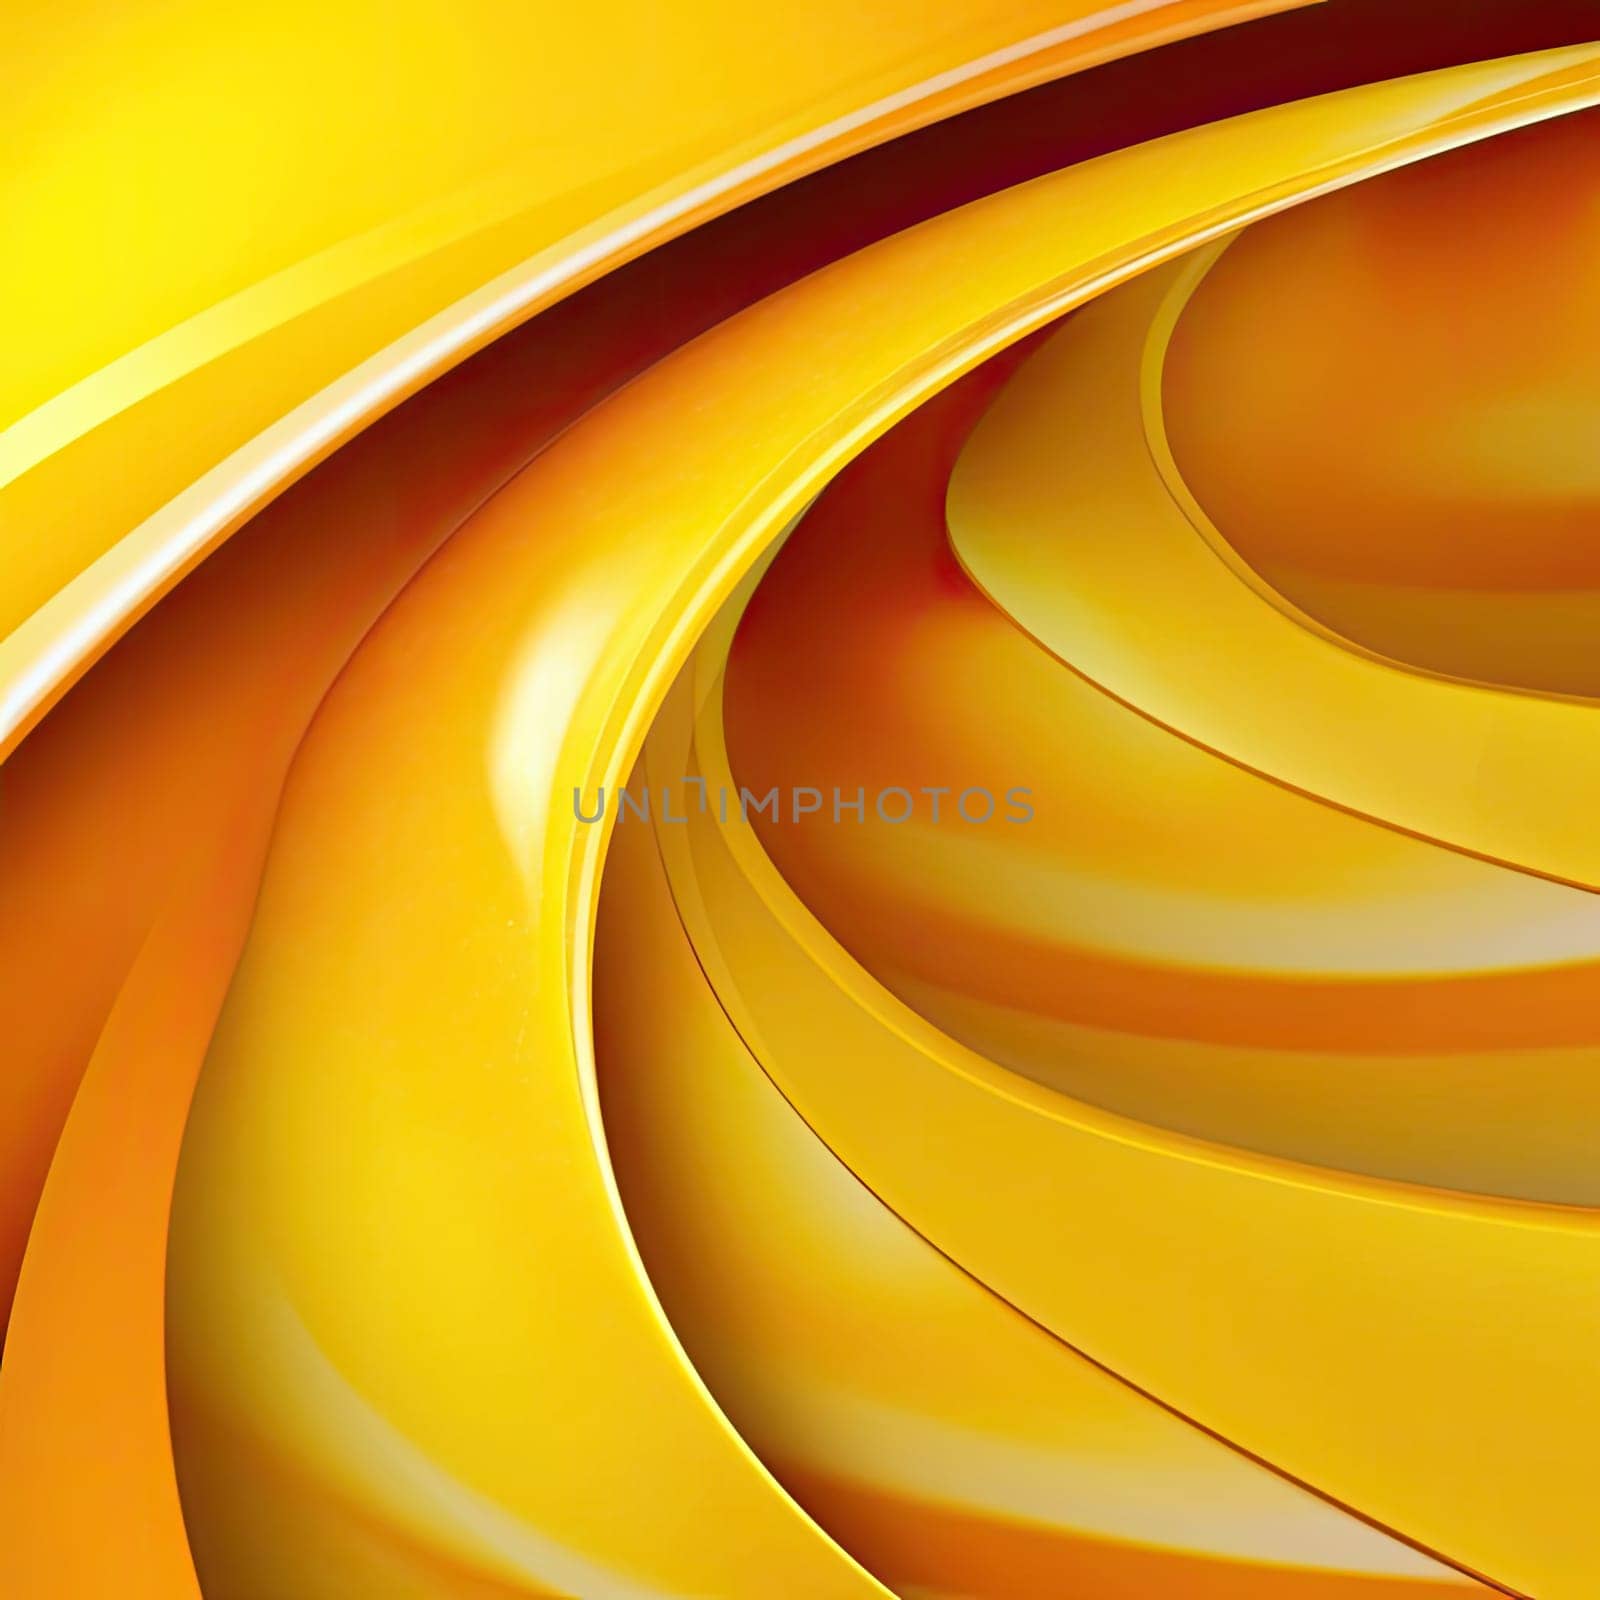 Abstract yellow background with some smooth lines in it by eduardobellotto